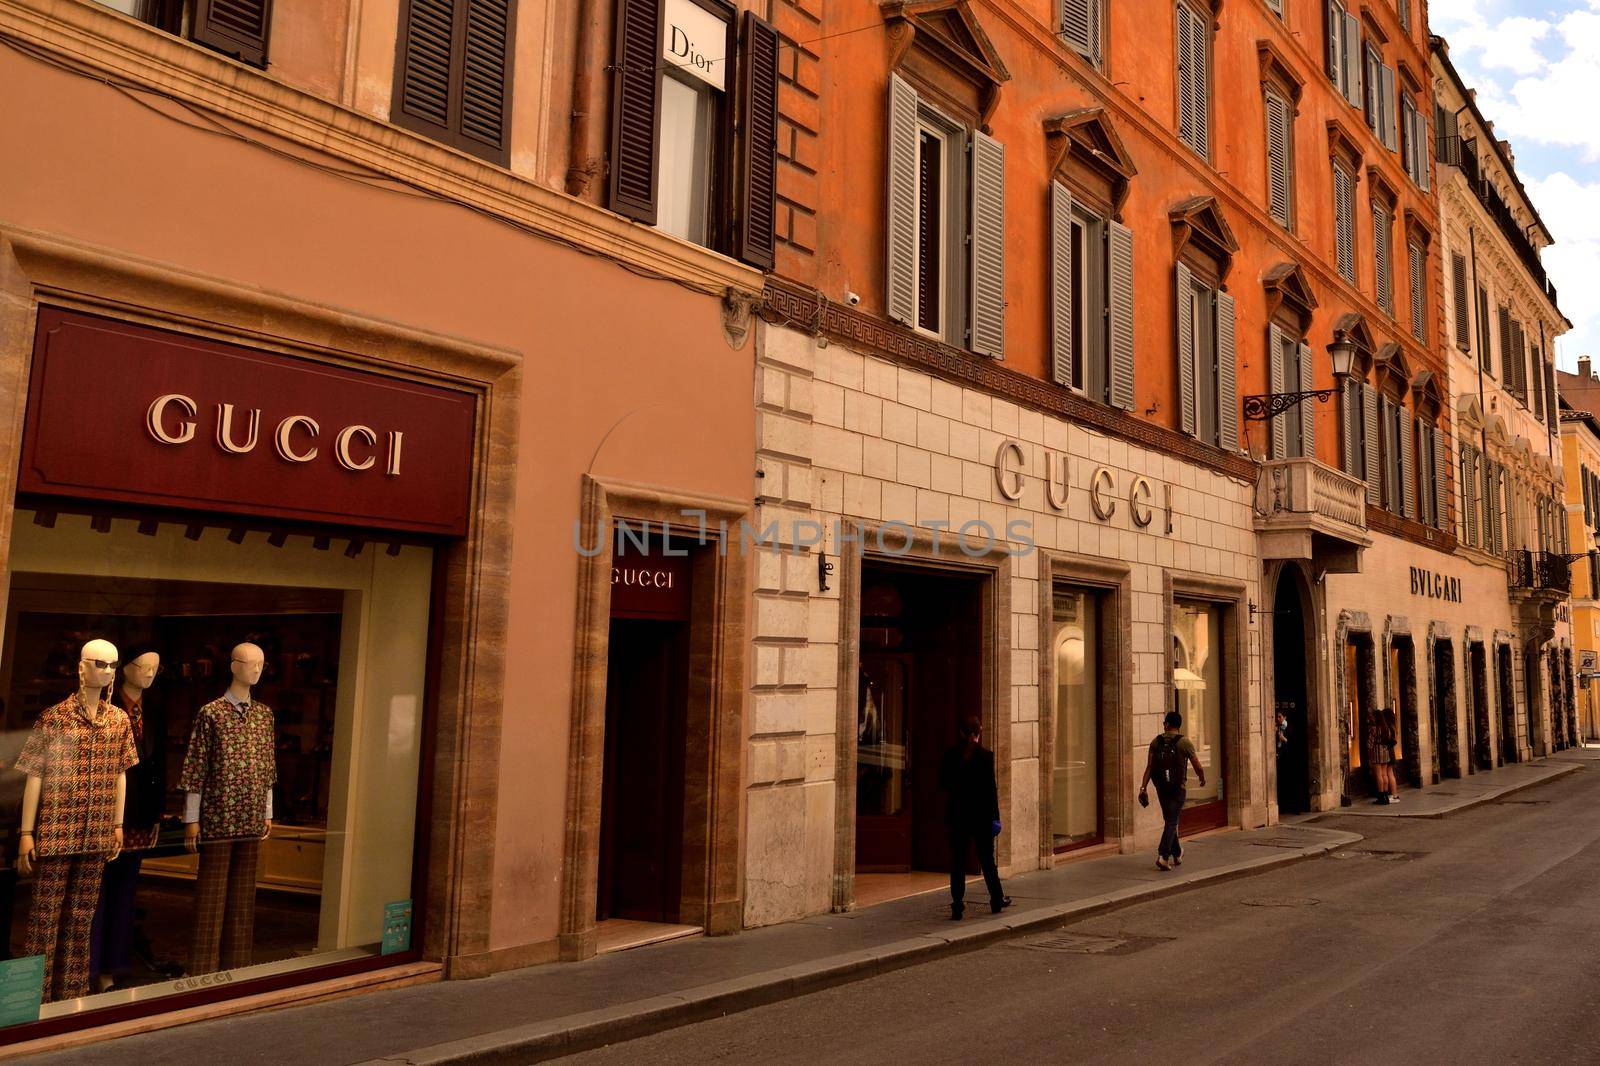 May 25th 2020, Rome, Italy: View of the Gucci store in Via dei Condotti without tourists due to the phase 2 of lockdown